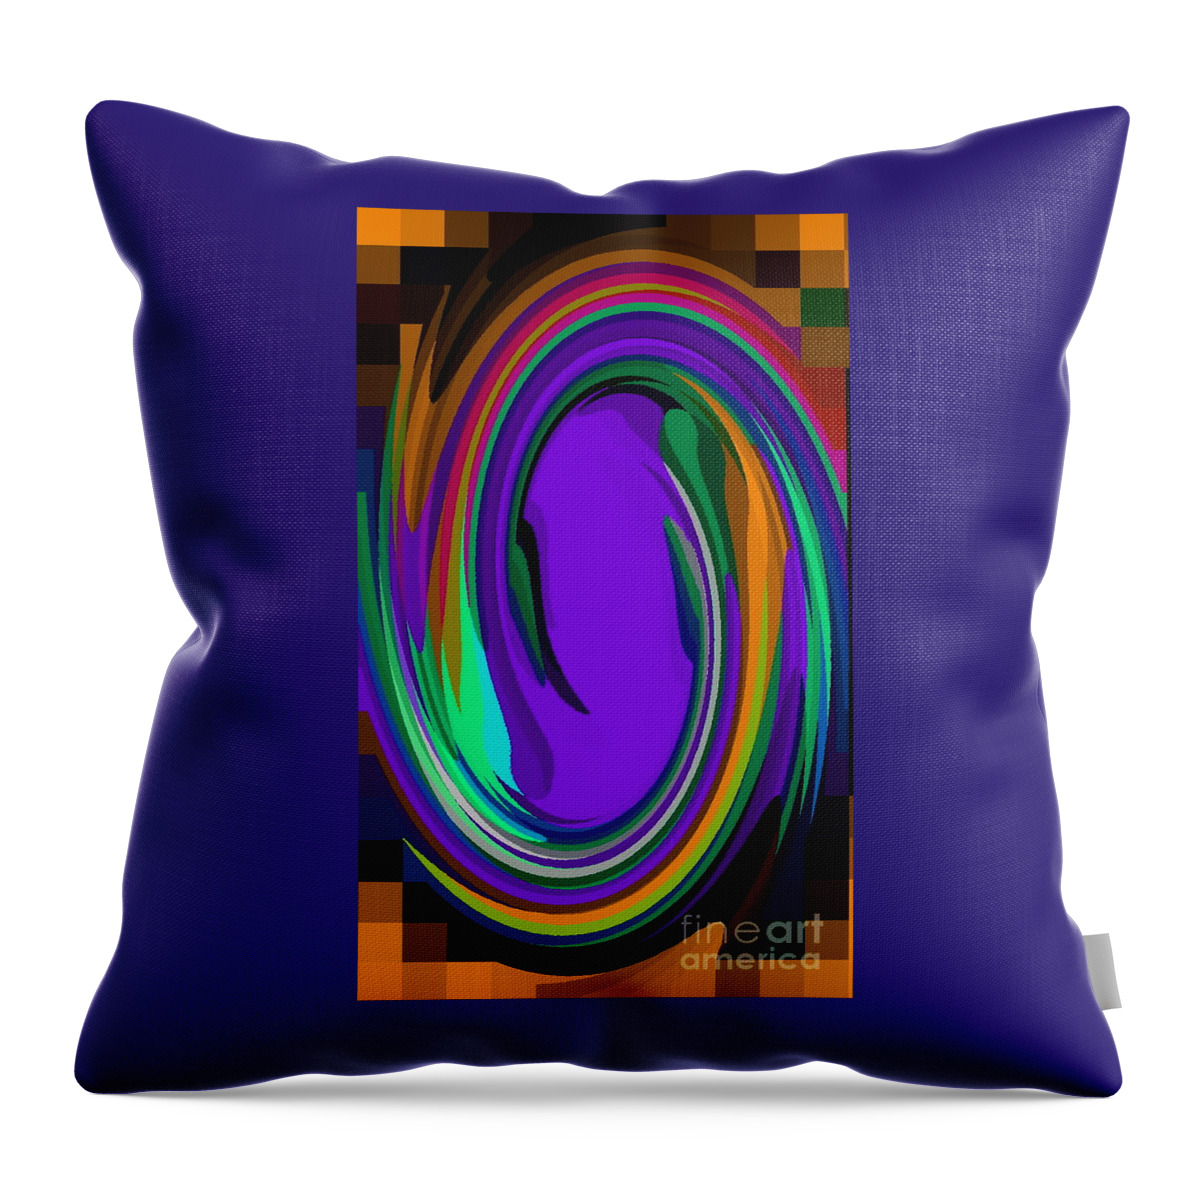 Colorful Swirls And Turns Collectible Fine Art C Spandau Canadian Wearable Designs Canadian Artist Throw Pillow featuring the painting Colorful Swirls And Turns Collectible Fine Art C Spandau Canadian Wearable Designs Canadian Artist by Carole Spandau